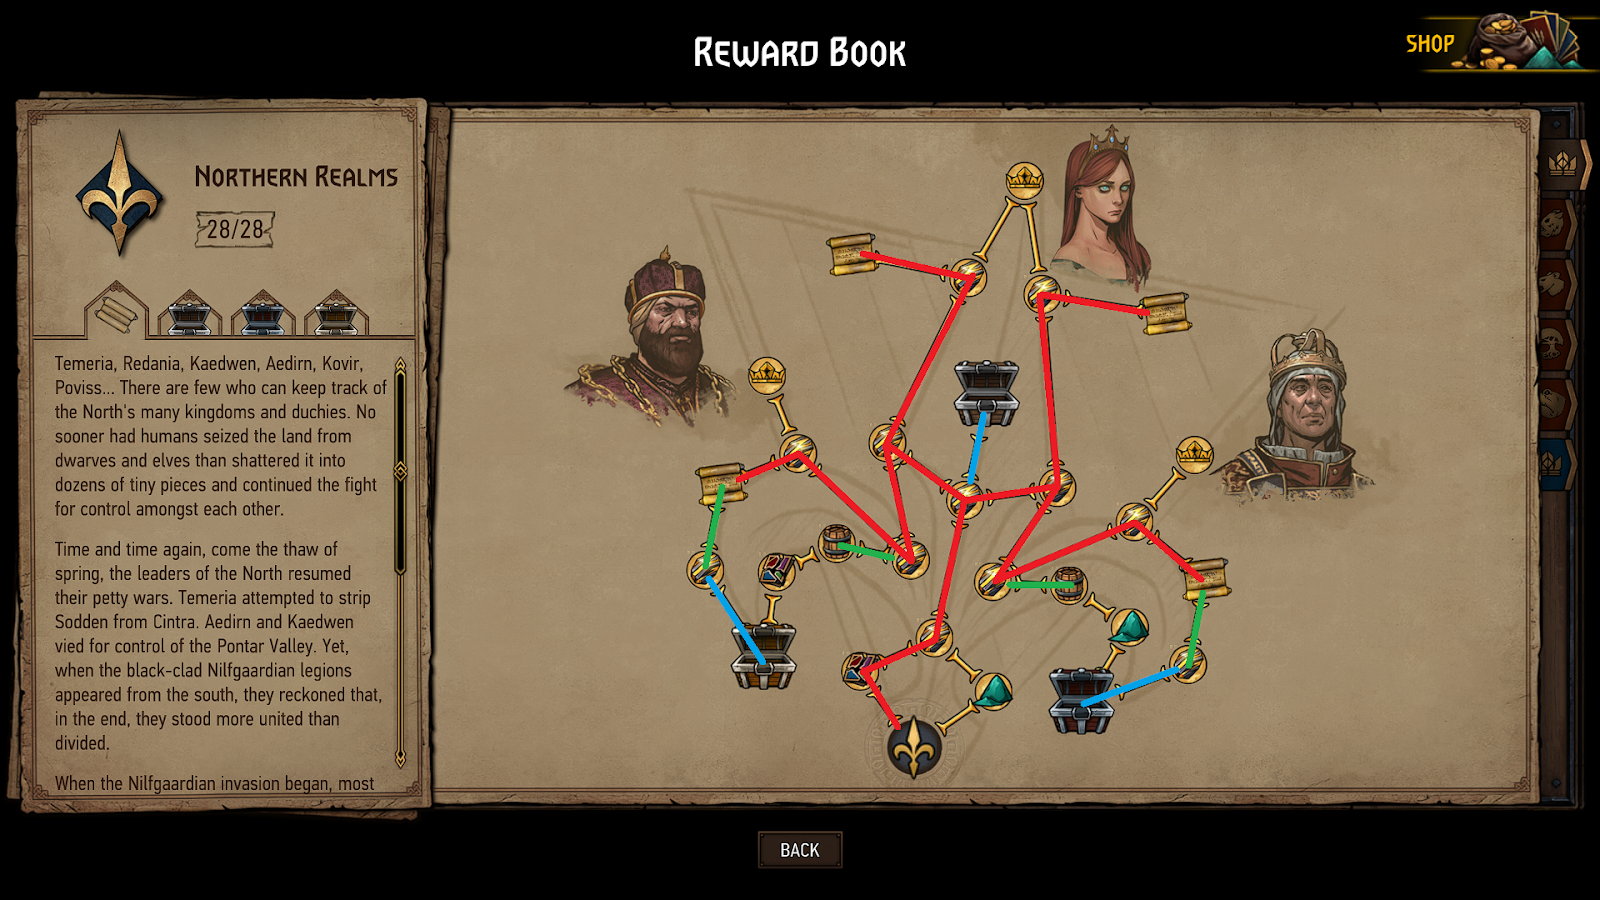 The different routes are shown in red, blue and green on the reward tree for the Northern Realms